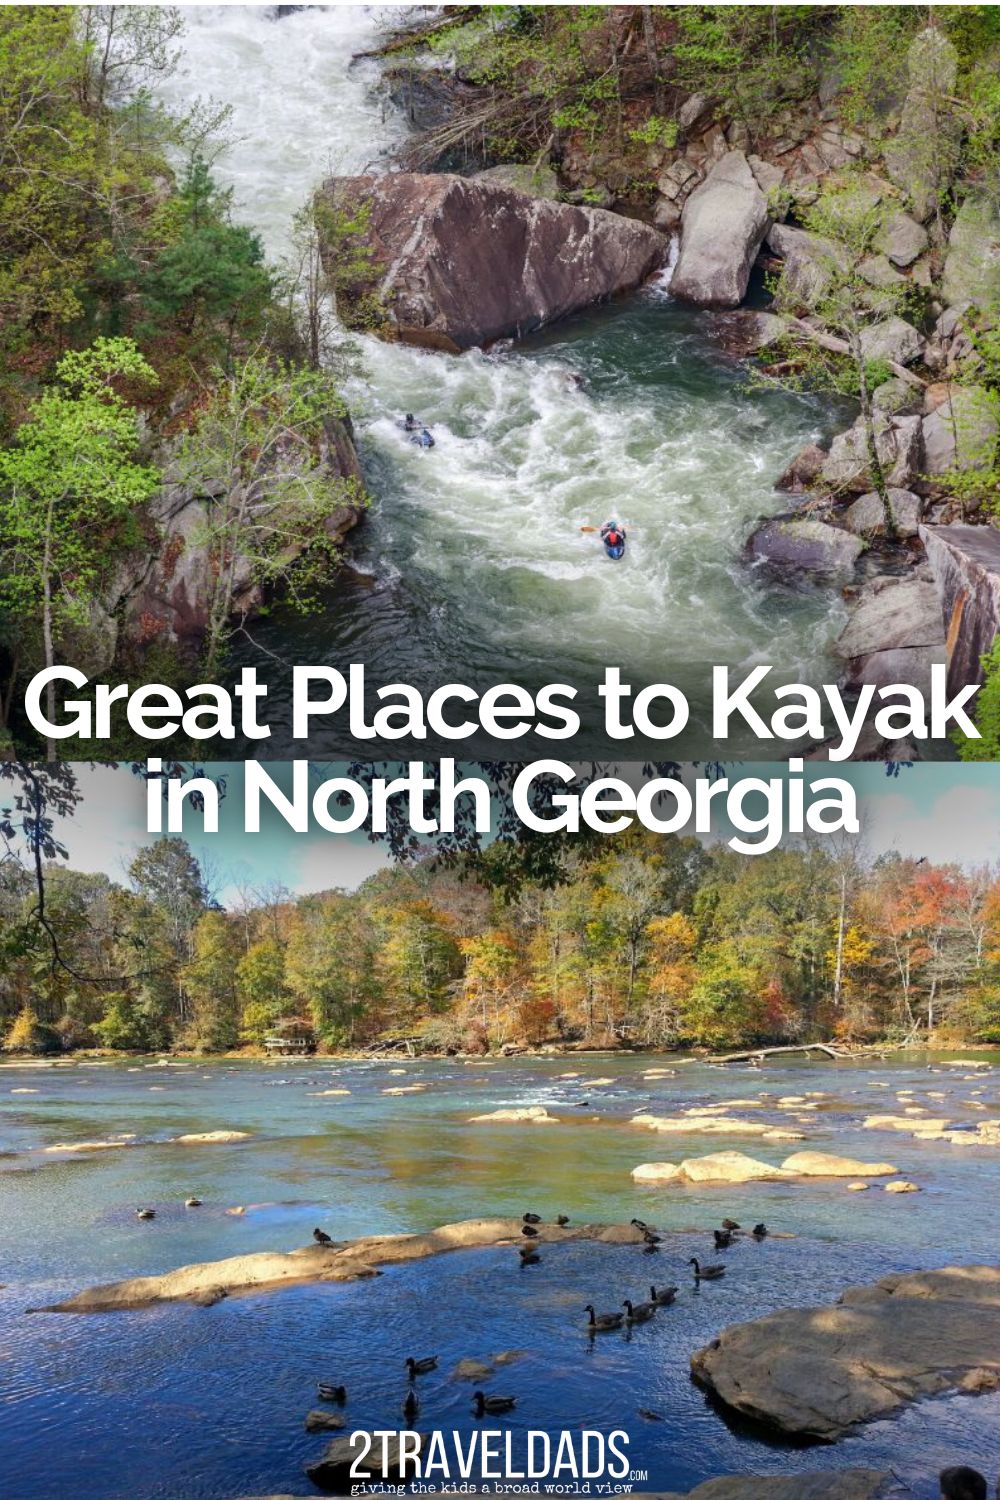 If you want to Kayak in North Georgia, you will have plenty of places to choose from. This includes state parks near Atlanta, river gorges in the Appalachians, and even floating down the Chattahoochee River. These are our top picks for kayaking and paddling in northern Georgia.